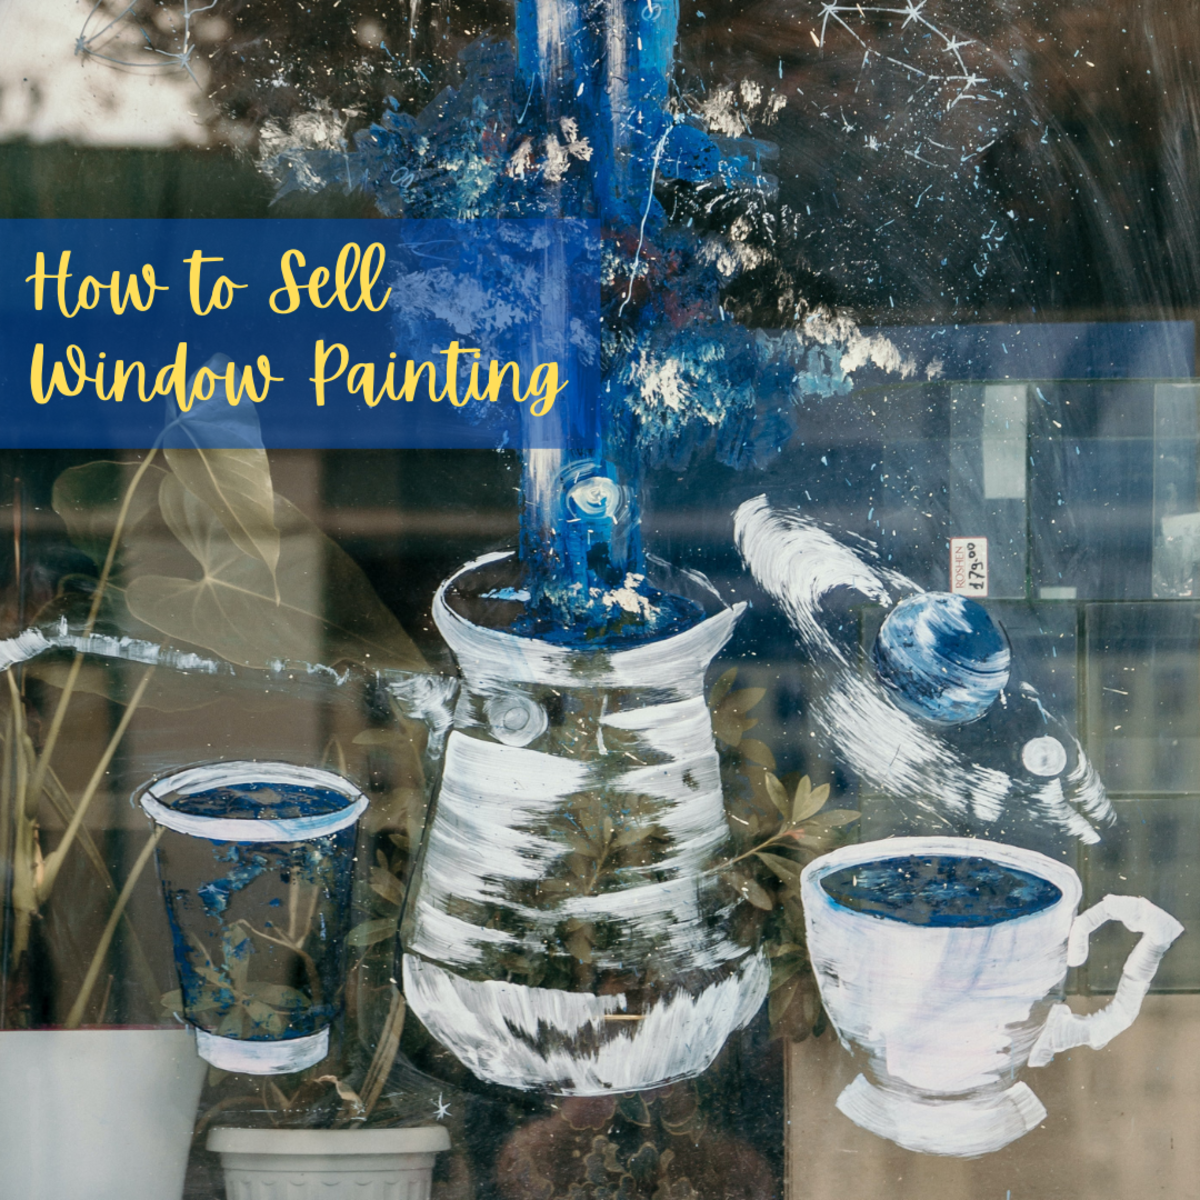 How to Sell Window Painting